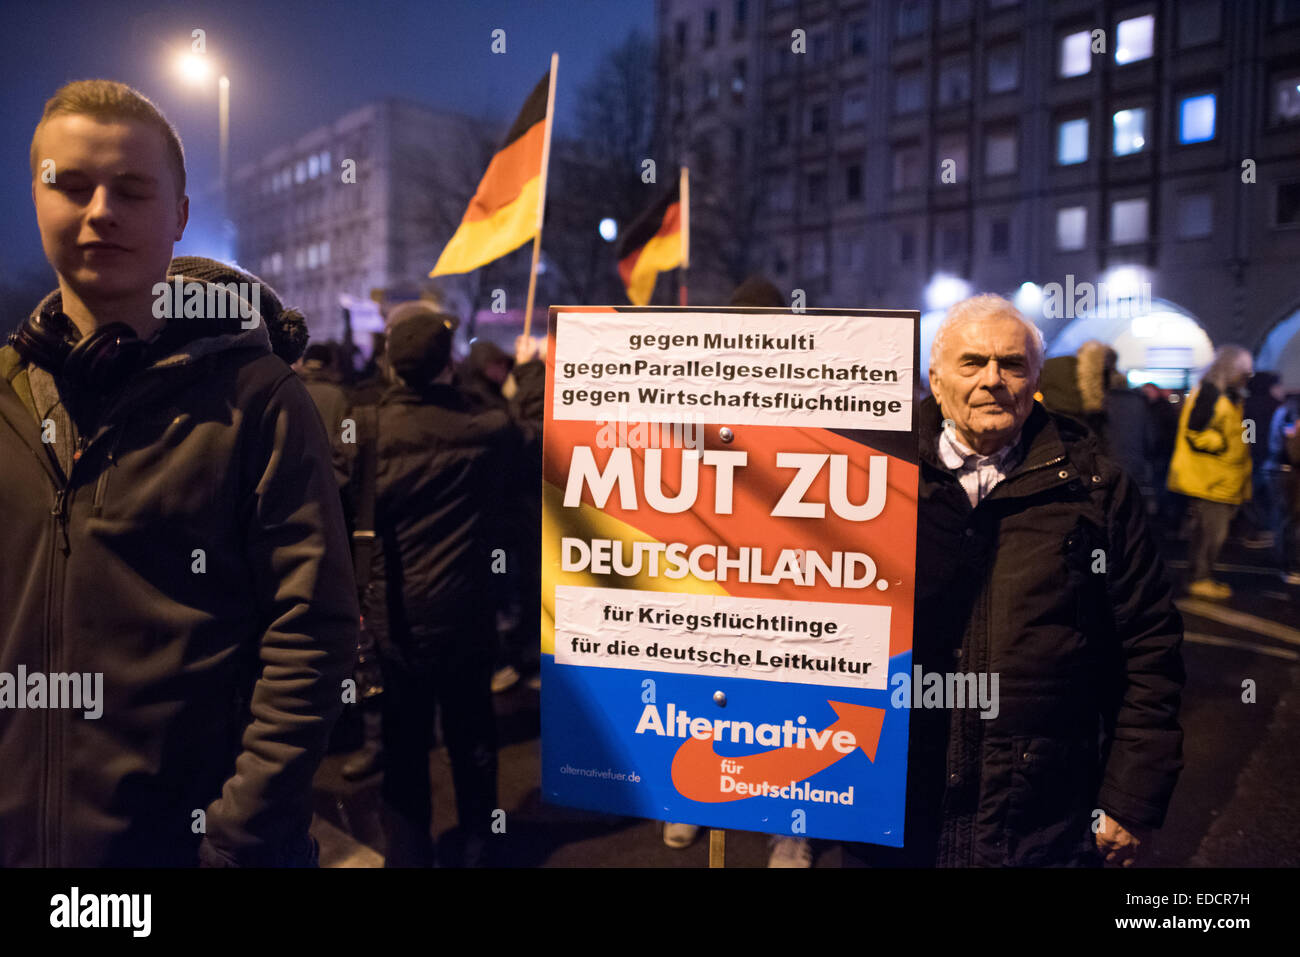 Berlin, Germany. 5th Jan, 2015. Followers of the movement 'Baergida' (Berlin Patriots against the islamization of the Occident) protest in Berlin, 5 January 2015. Right-wing initiative PEGIDA (Patriotic Europeans against the Islamization of the Occident) organizes protests against the alleged foreign infiltration in several citys. Several organizations announced ounterdemonstrations in Berlin. FOTO: BERND VON JUTRCZENKA/DPA/Alamy Live News Stock Photo